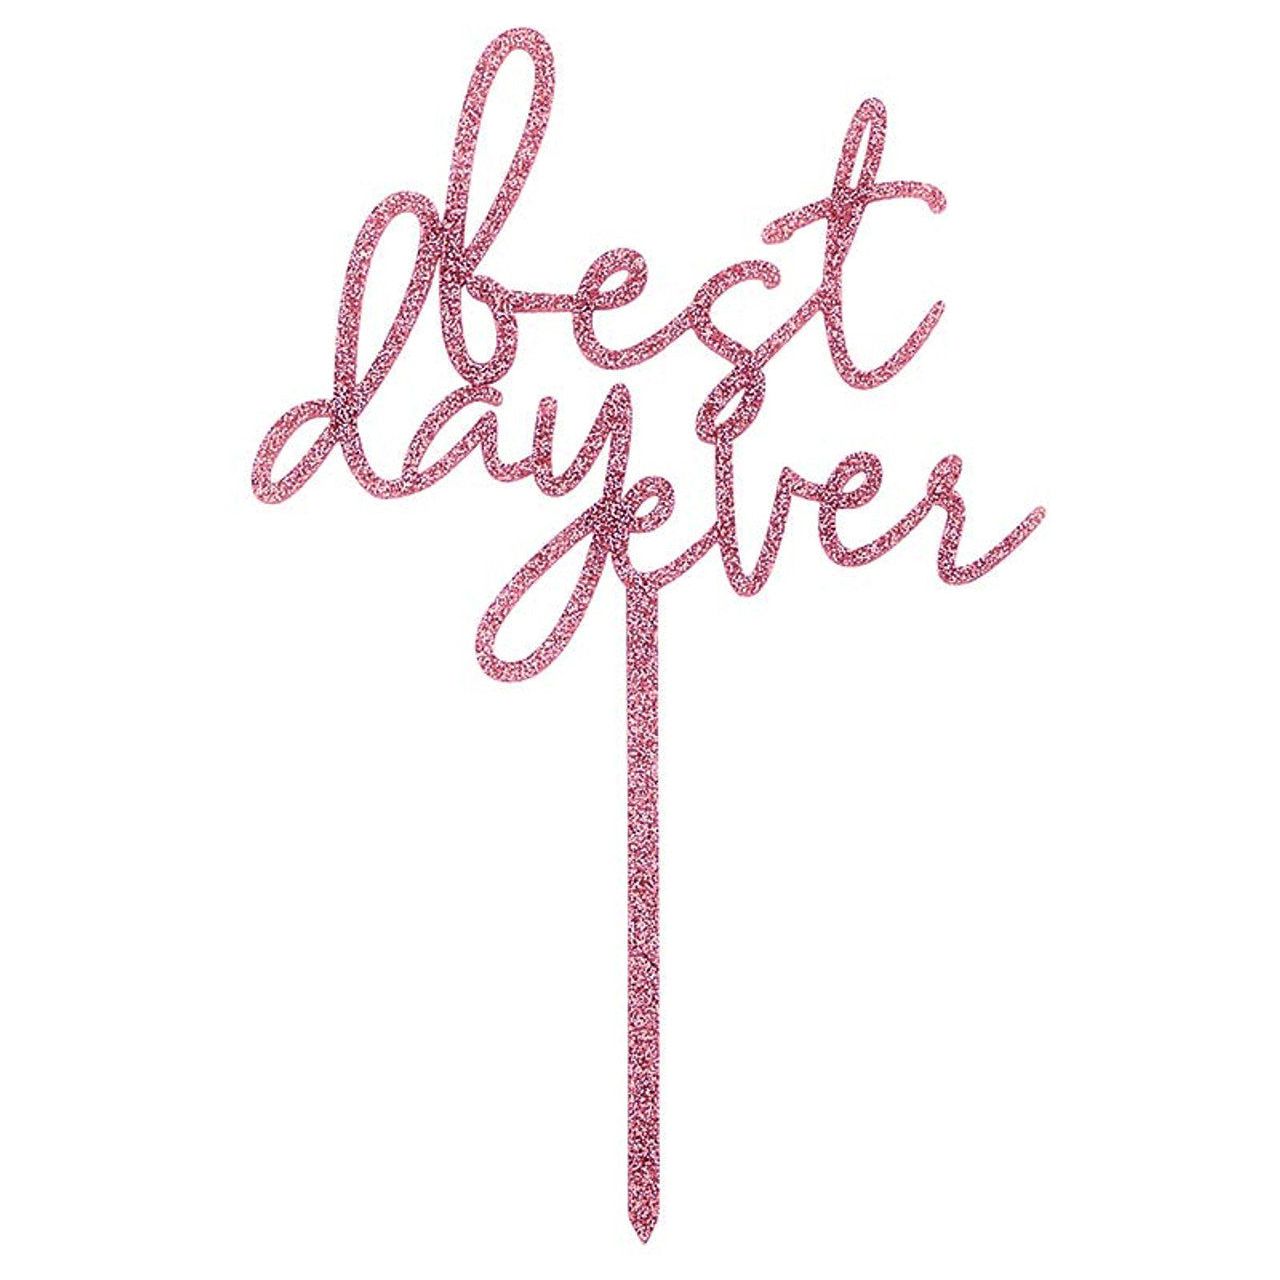 'Best Day Ever' Acrylic Cake Topper